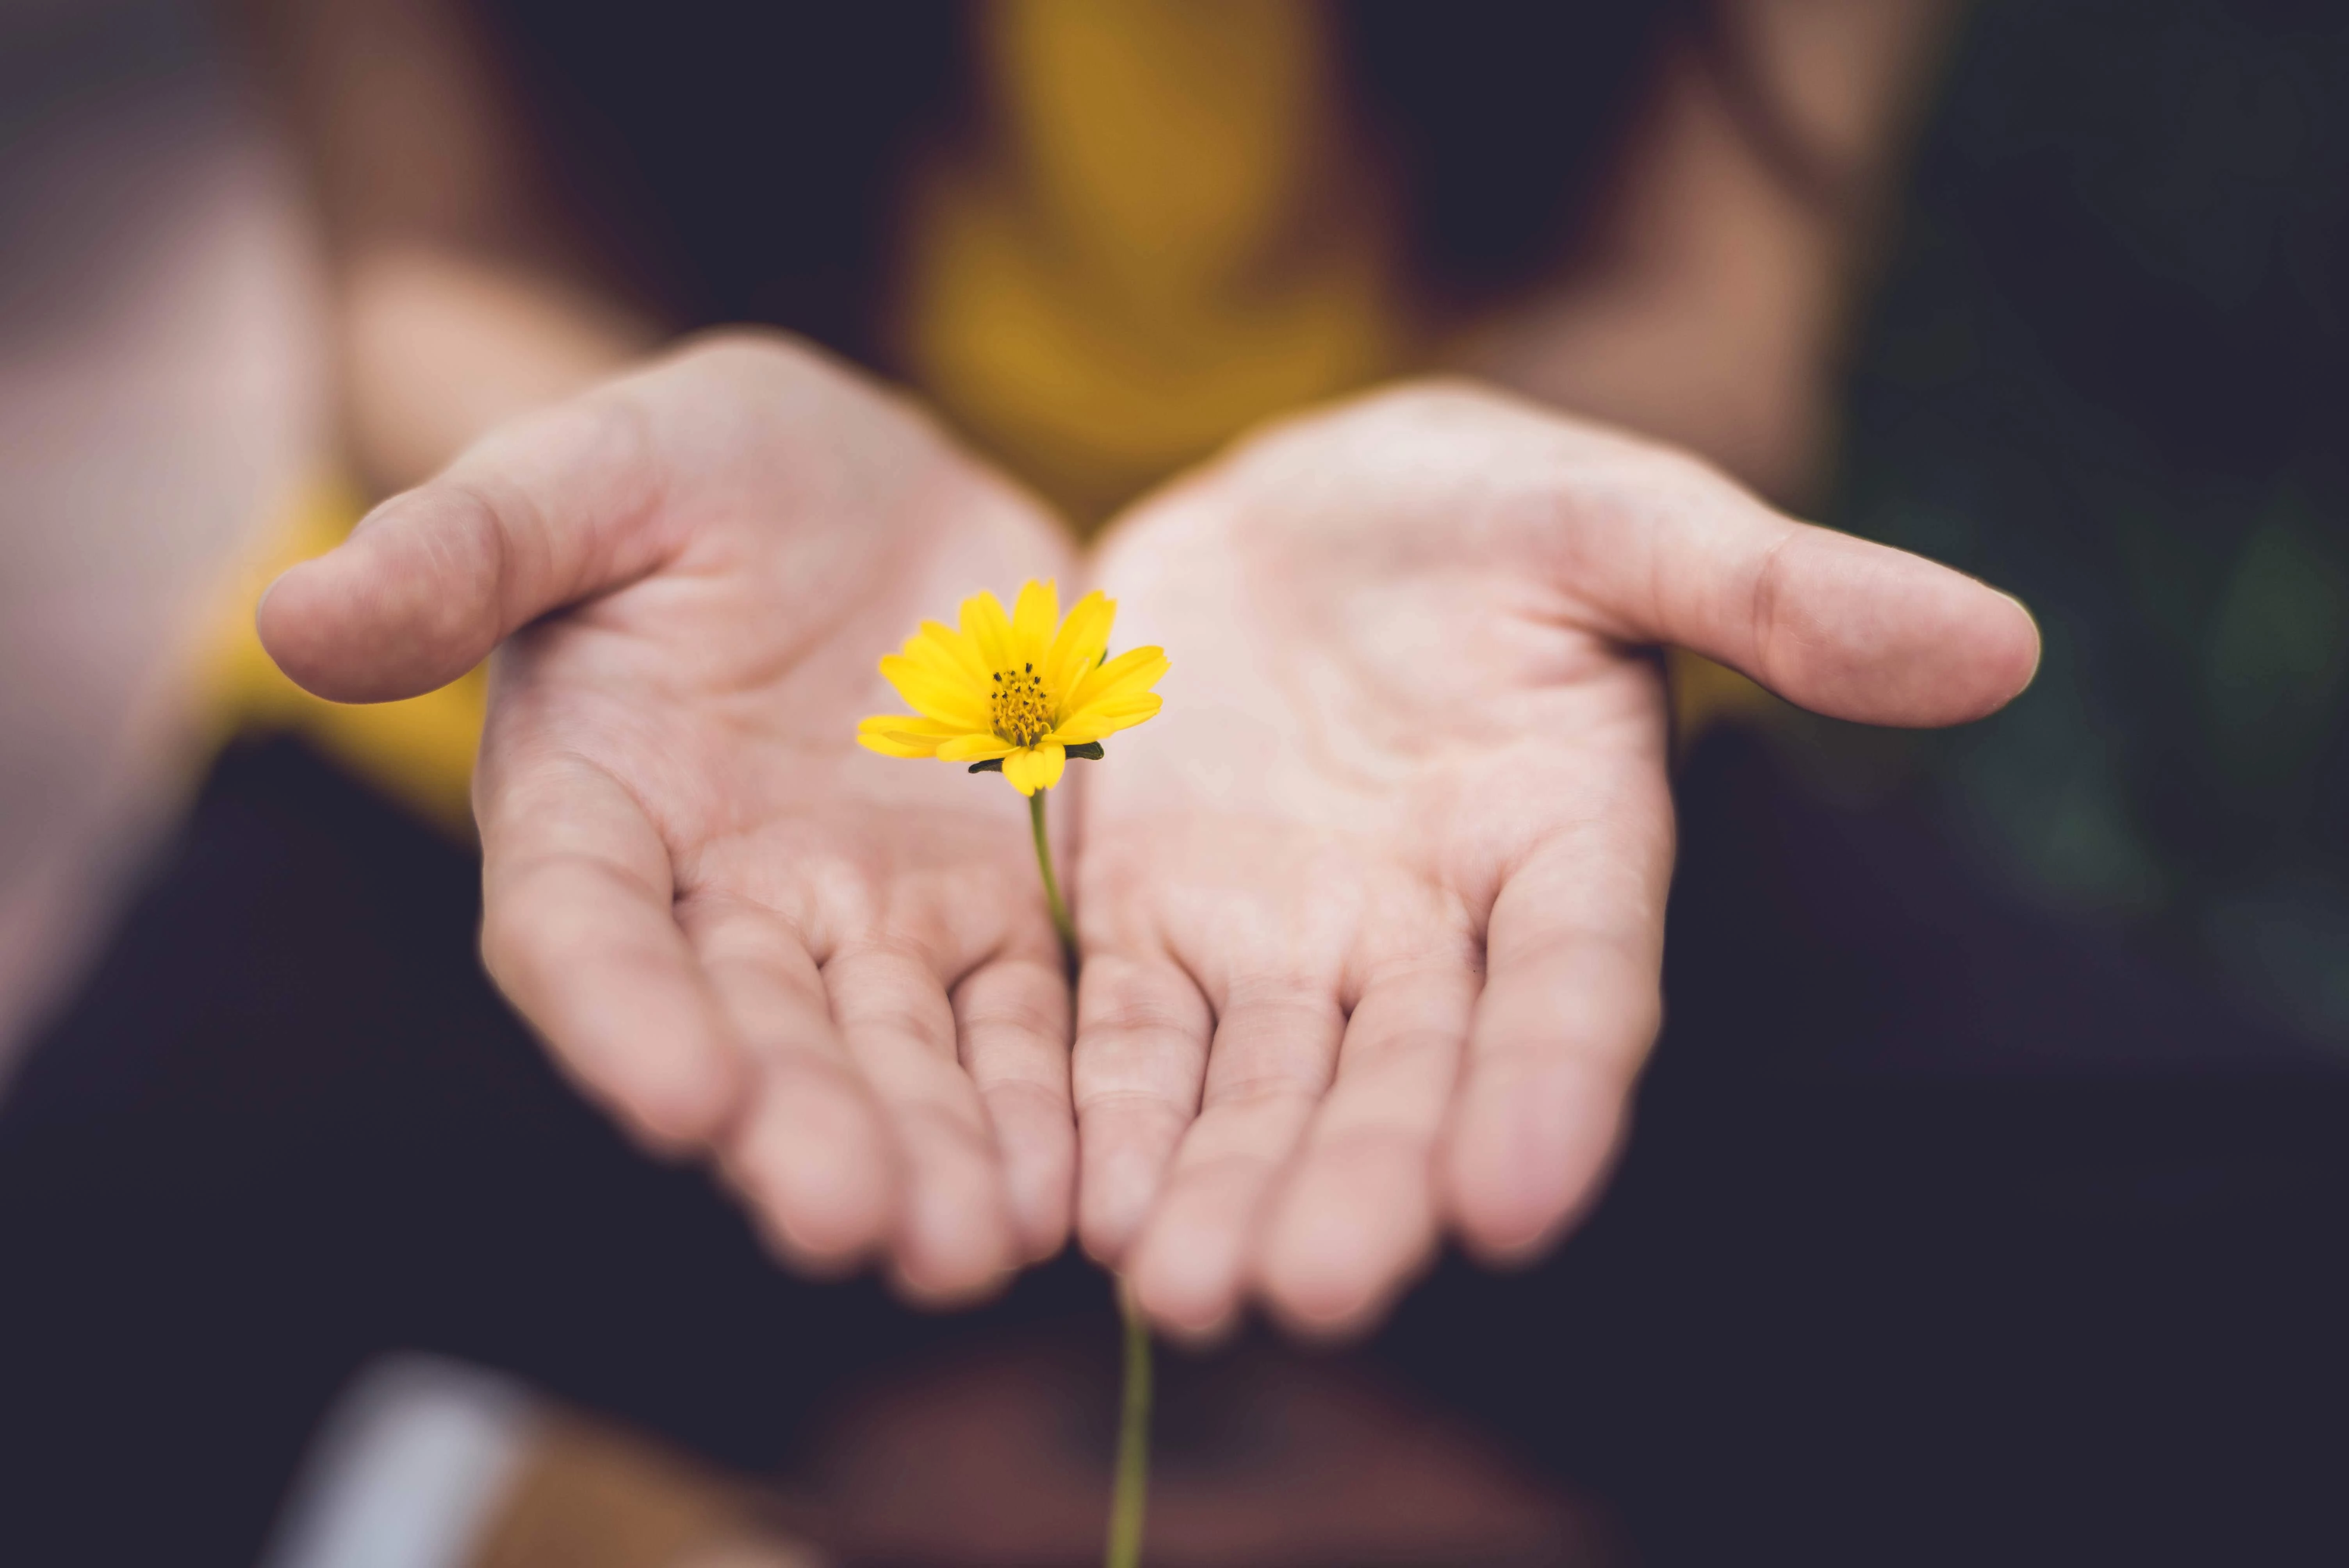 Pair of hands holding small yellow flower